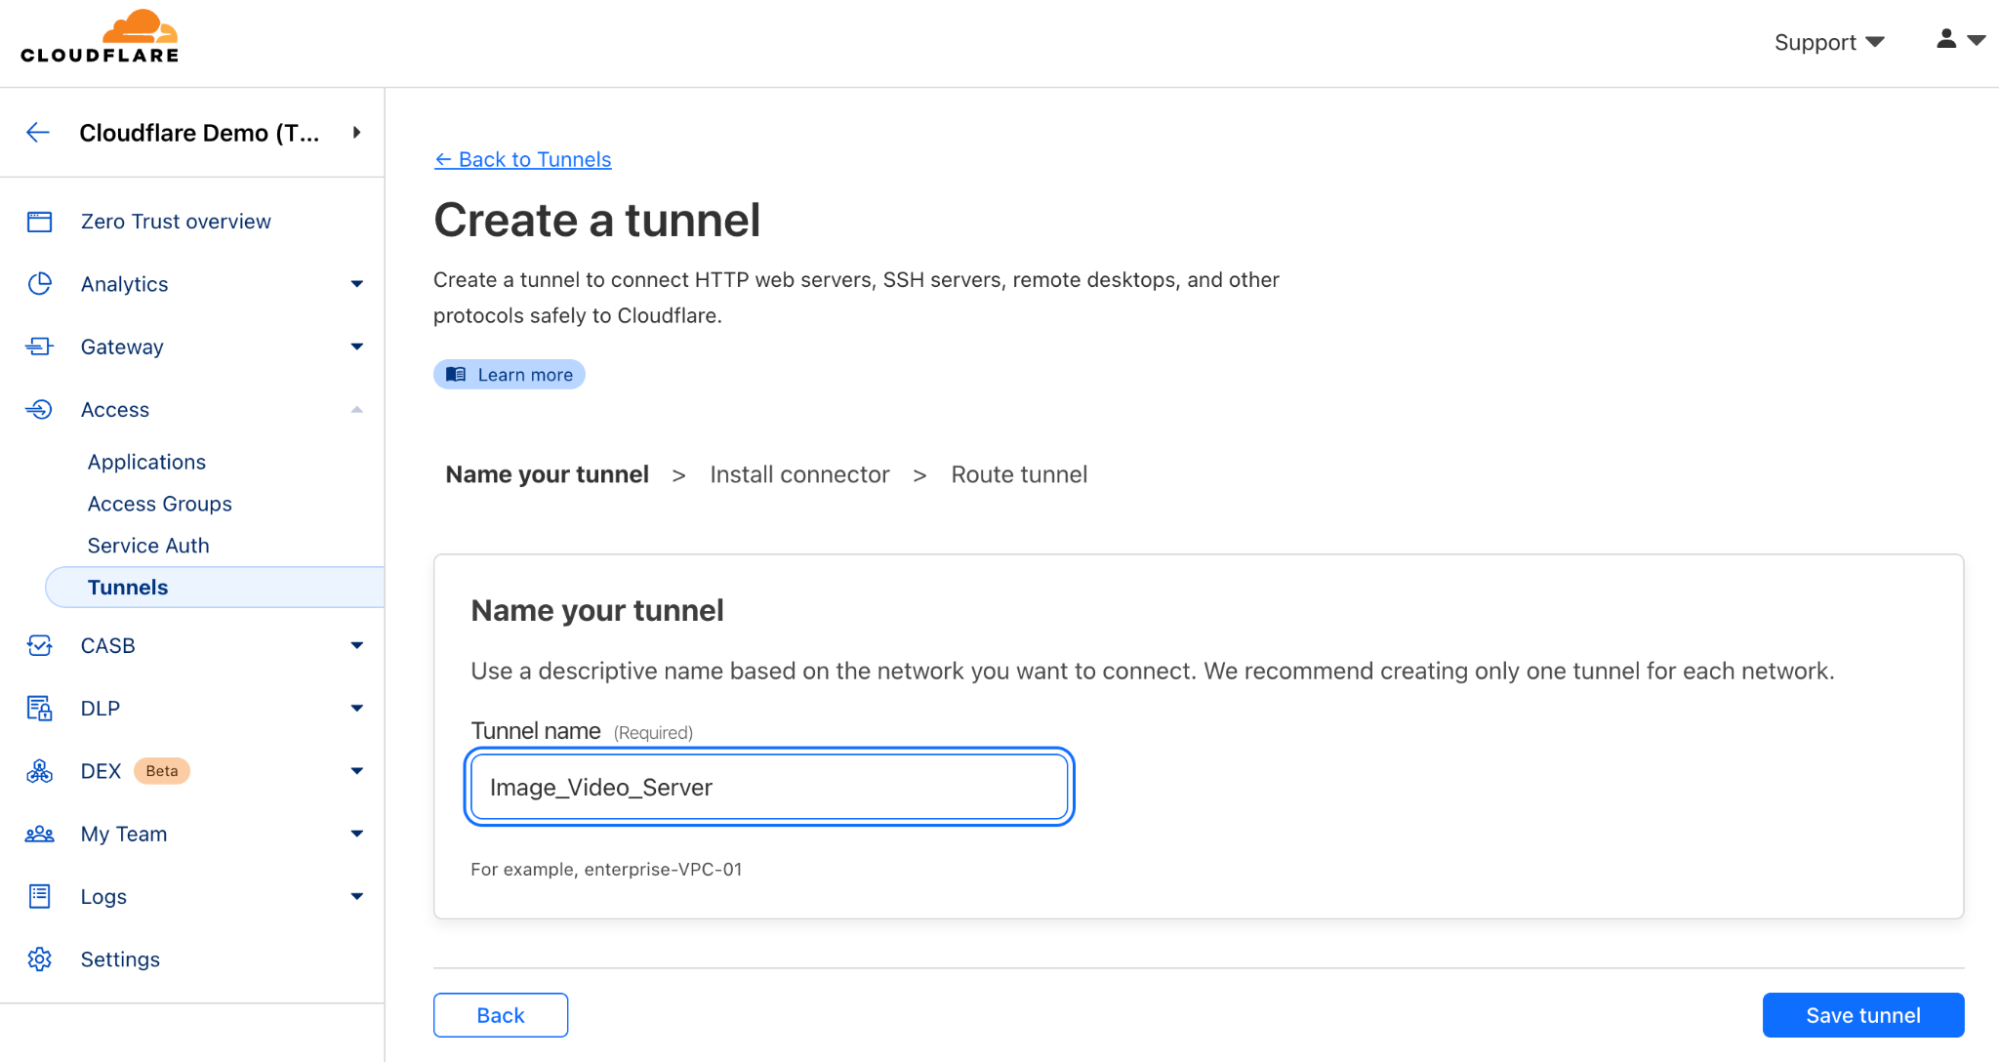 Cloudflare allows for easily creating and naming a tunnel.